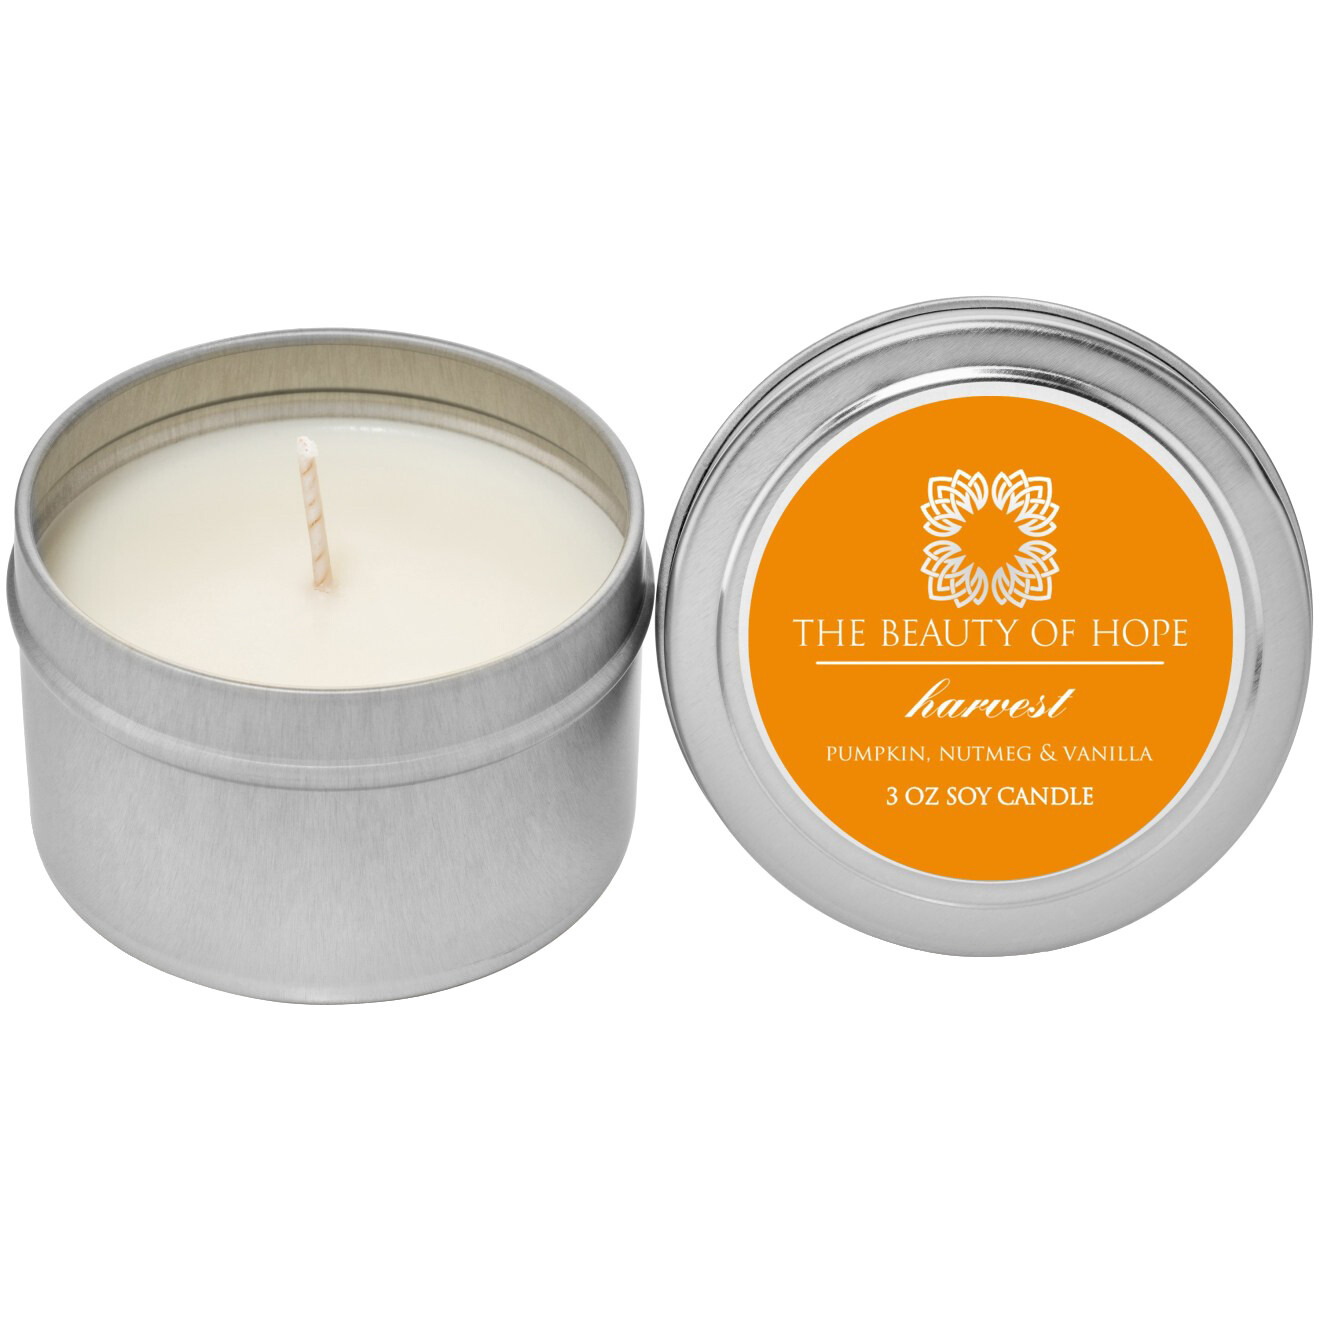 Harvest (3oz) Candle By The Beauty Of Hope